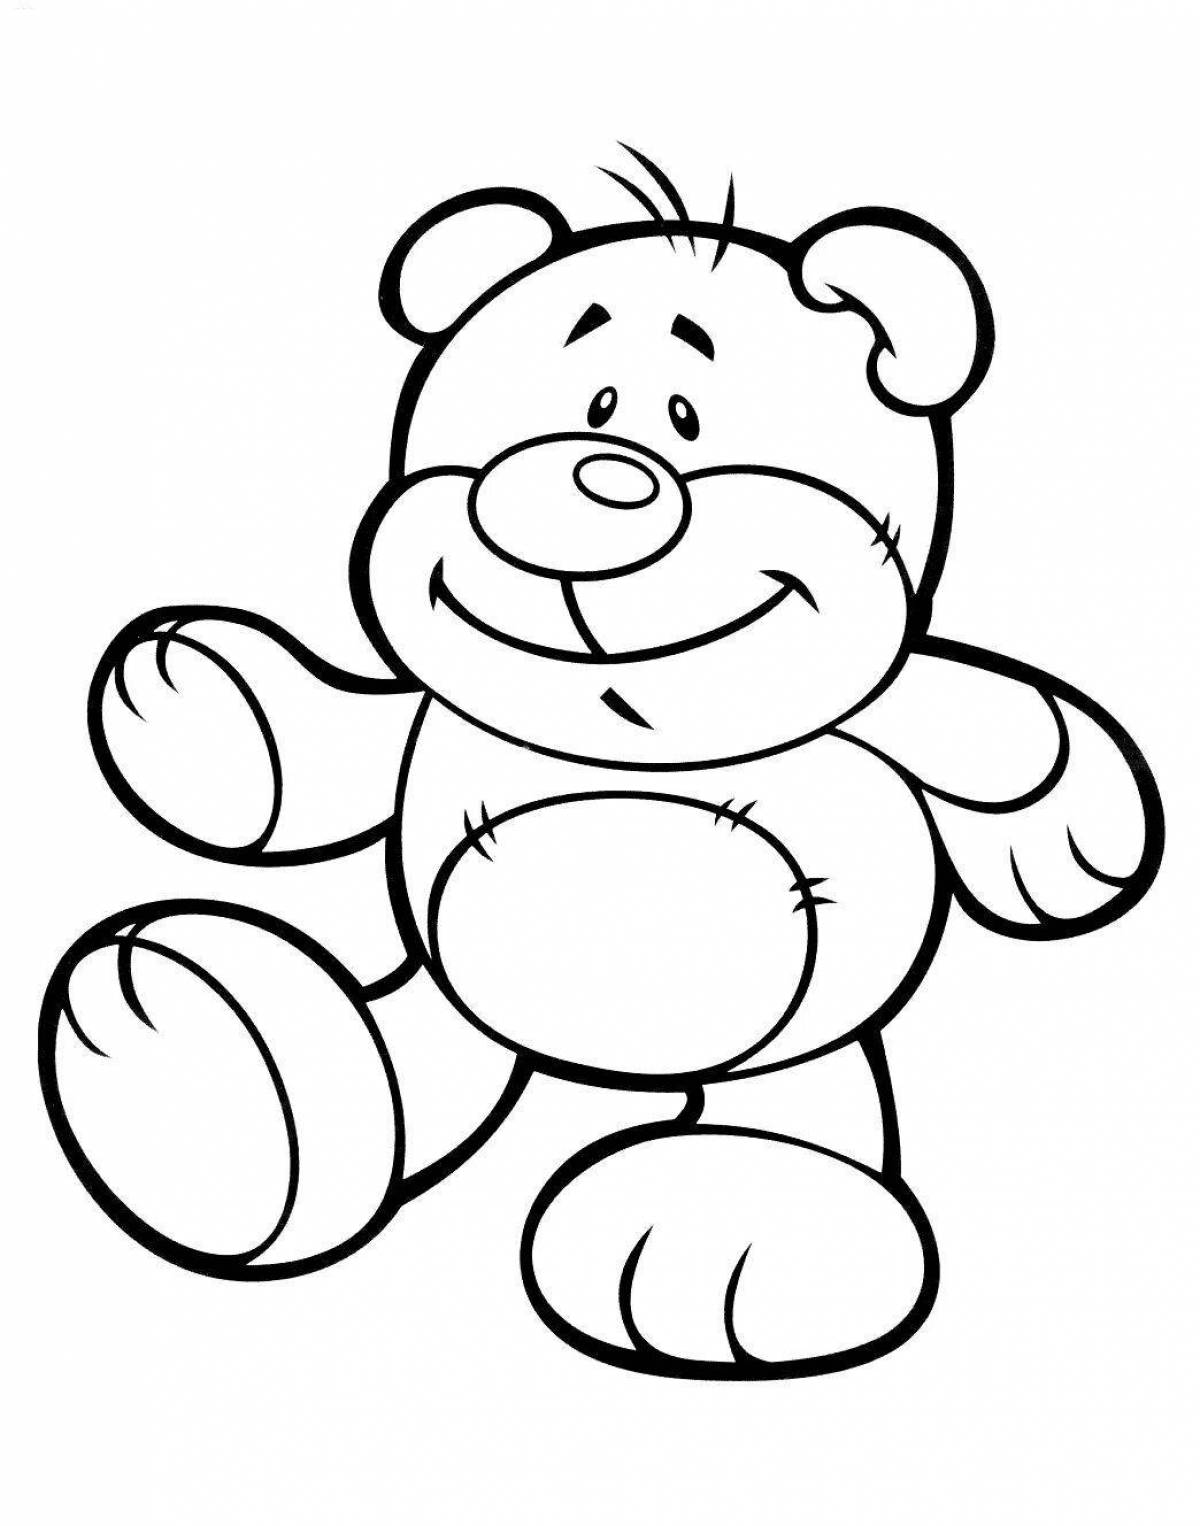 Smiling bear coloring page